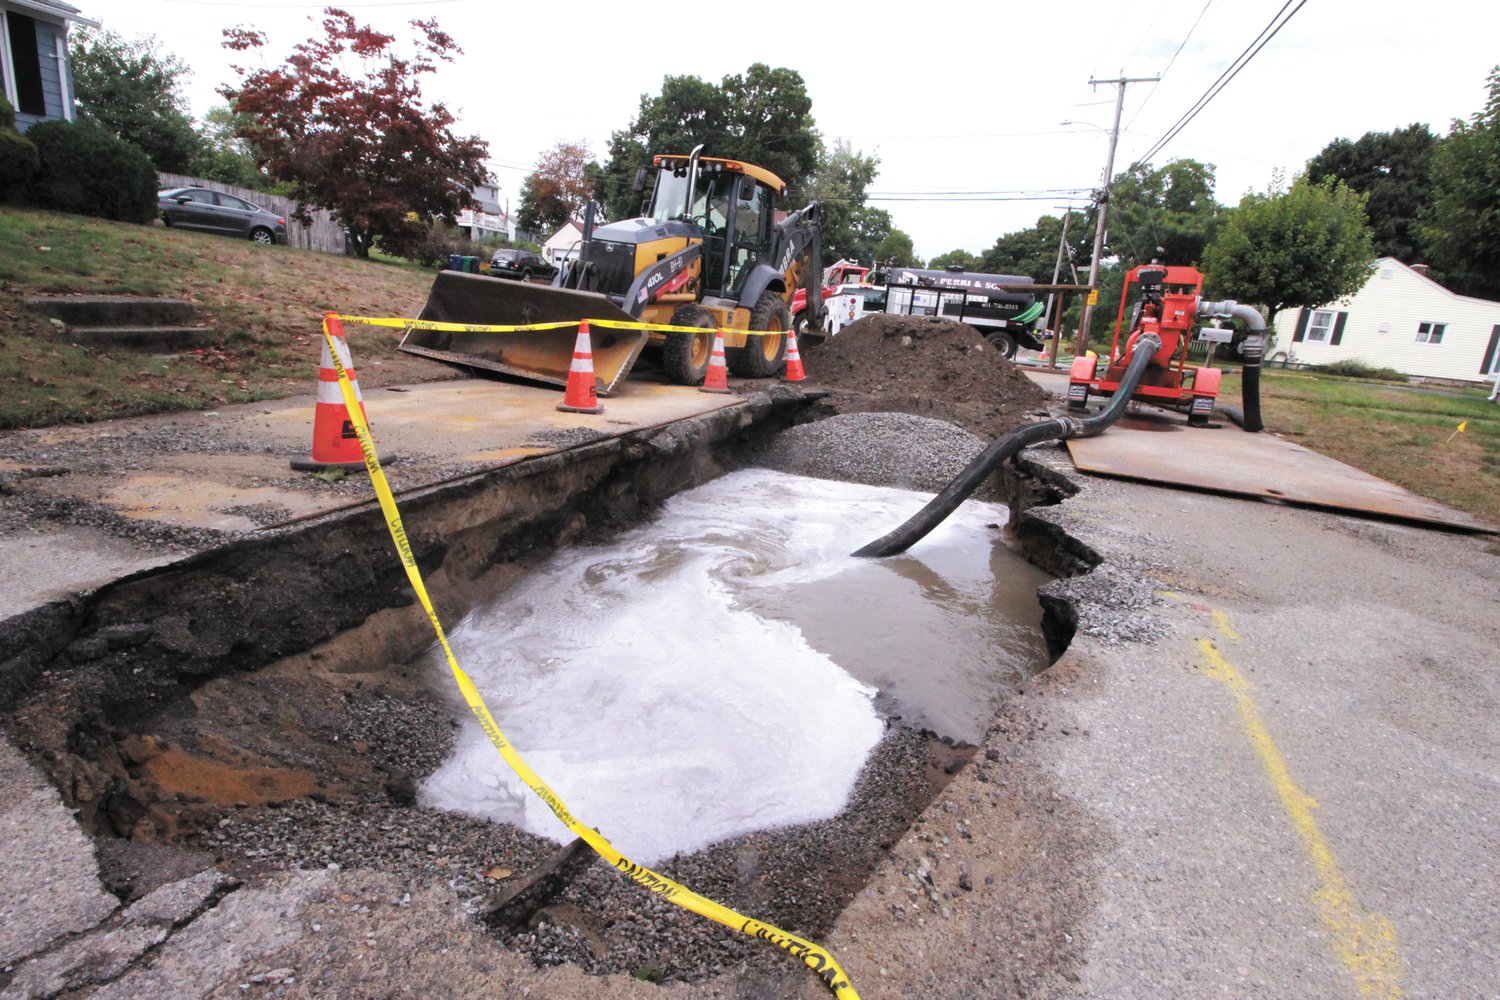 TRYING TO CATCH IT: As wastewater flowed from the ruptured forced main sewer line in Lake Shore Drive, it was pumped into a catch basin and then into septic tank trucks. However, not all of the waste water was captured leaving it to flow into Warwick Pond. (Warwick Beacon photos)